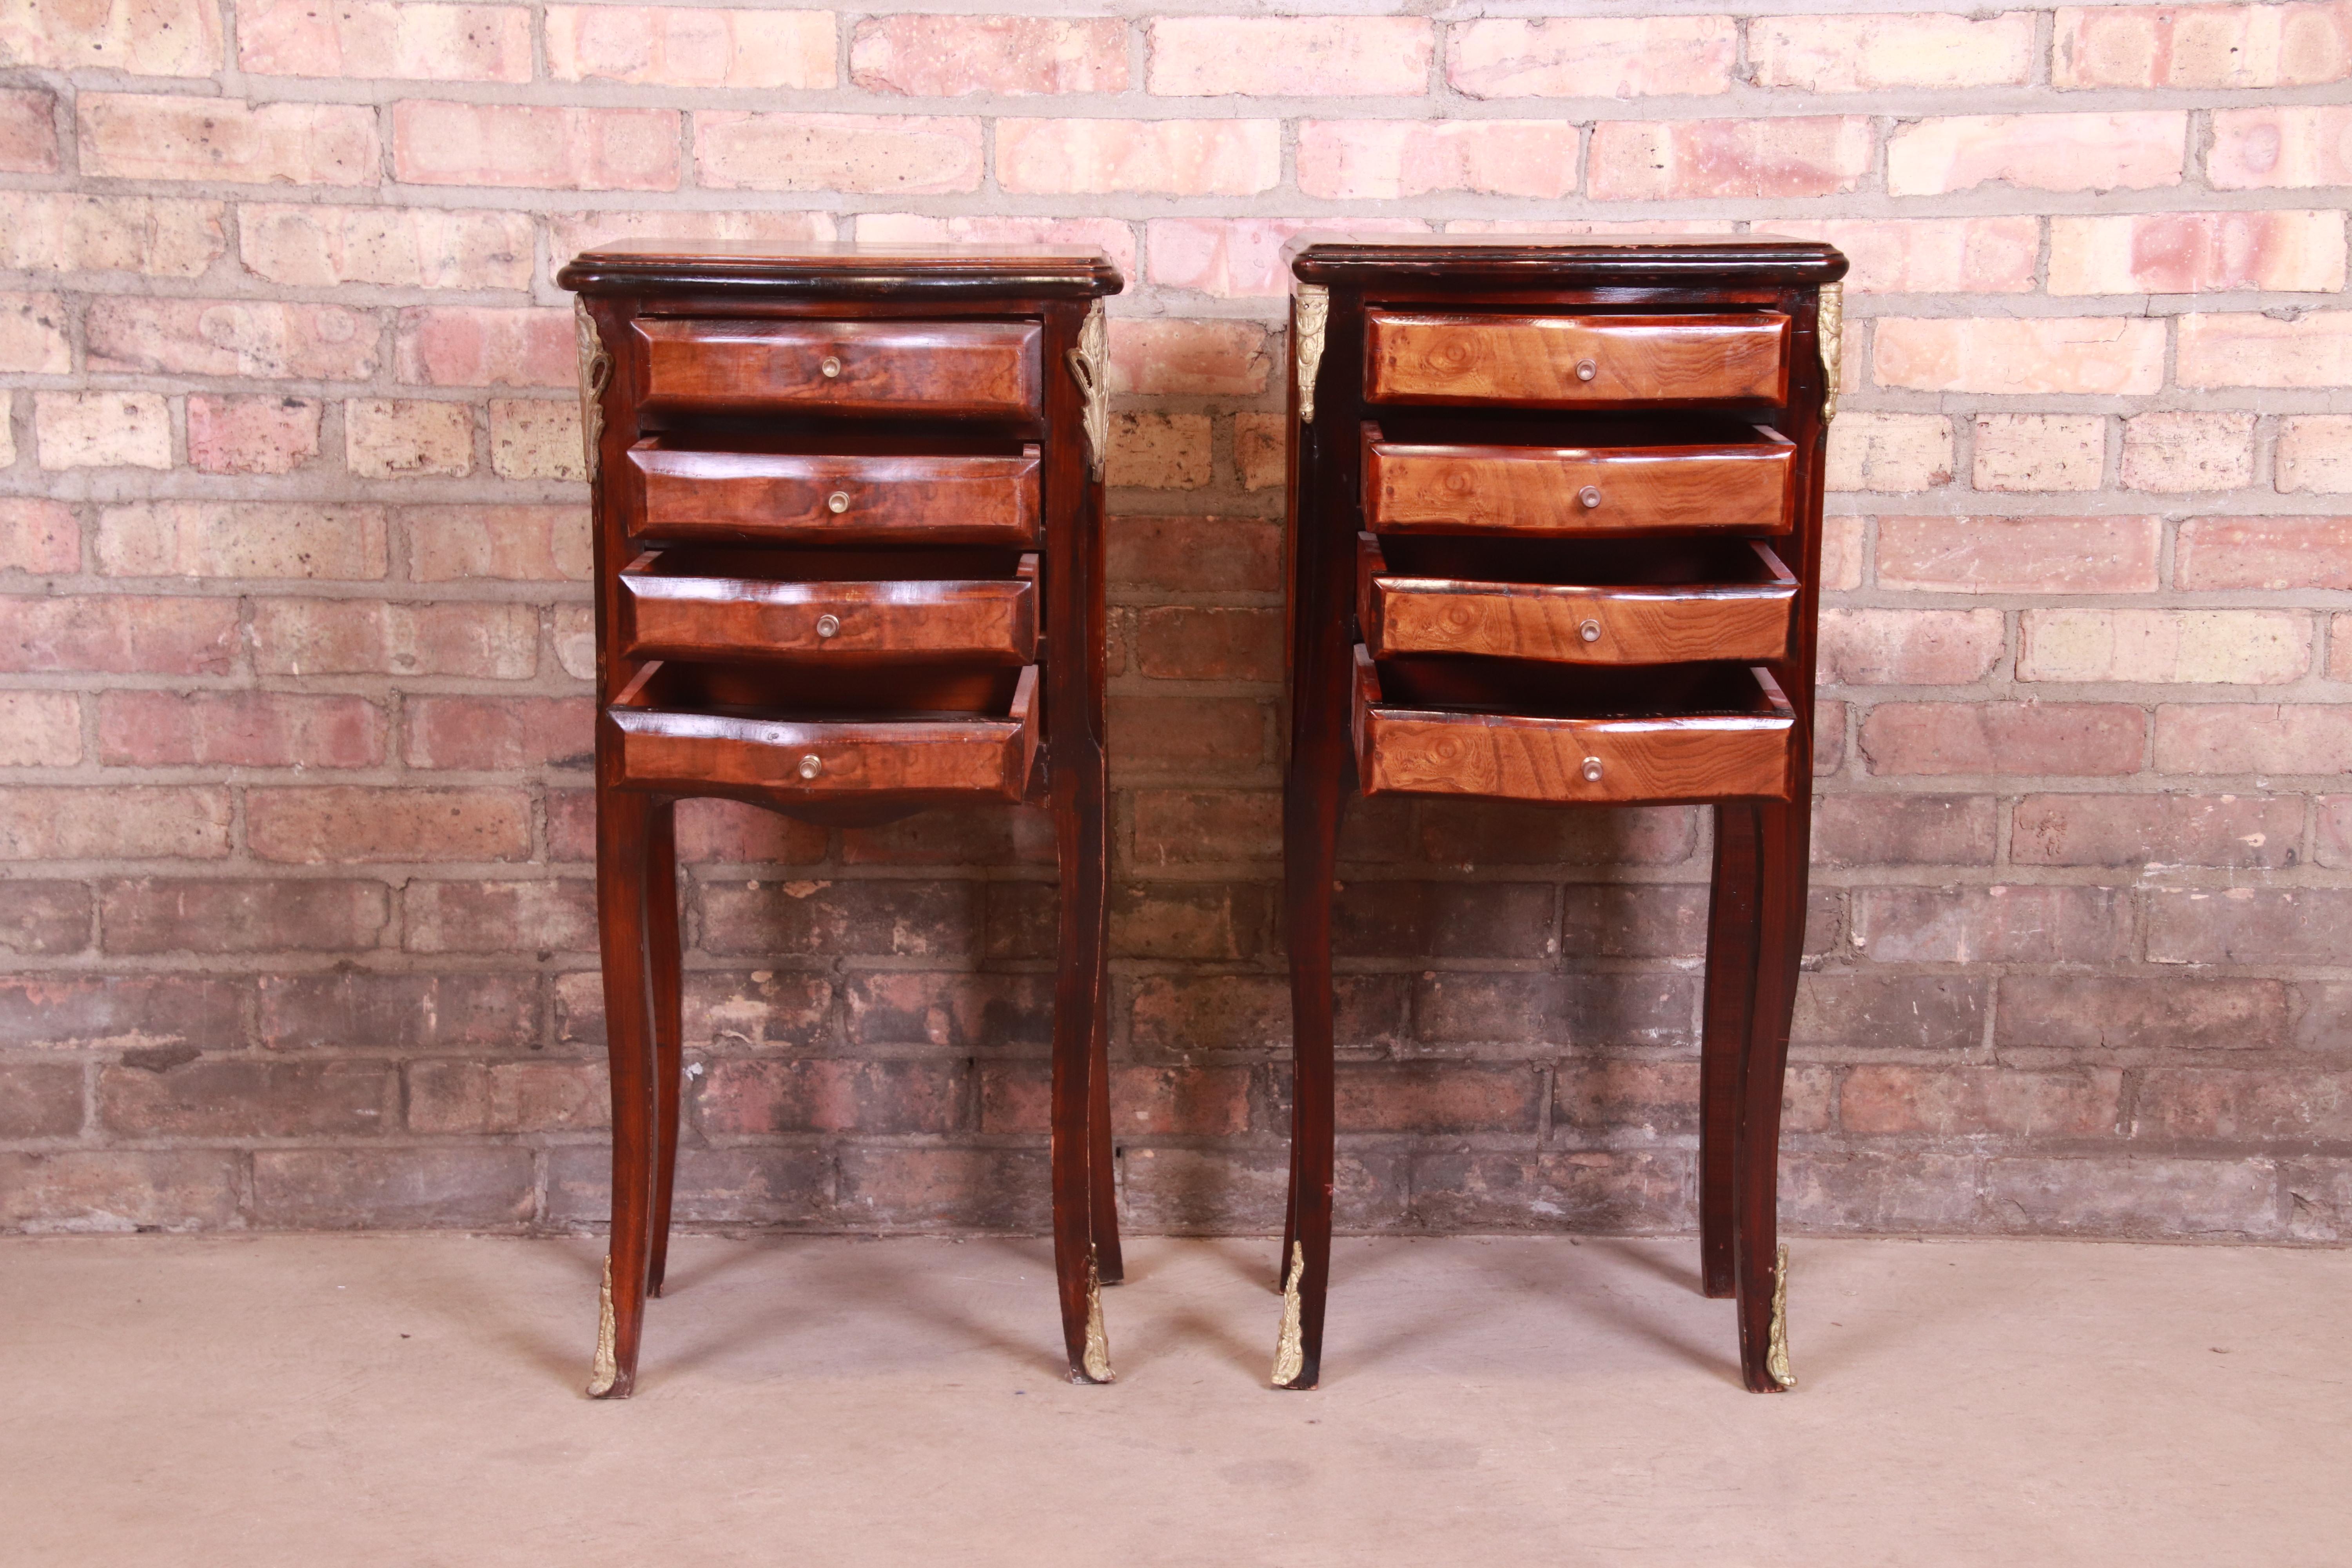 Petite French Provincial Louis XV Mahogany and Burl Wood Nightstands, Pair For Sale 5